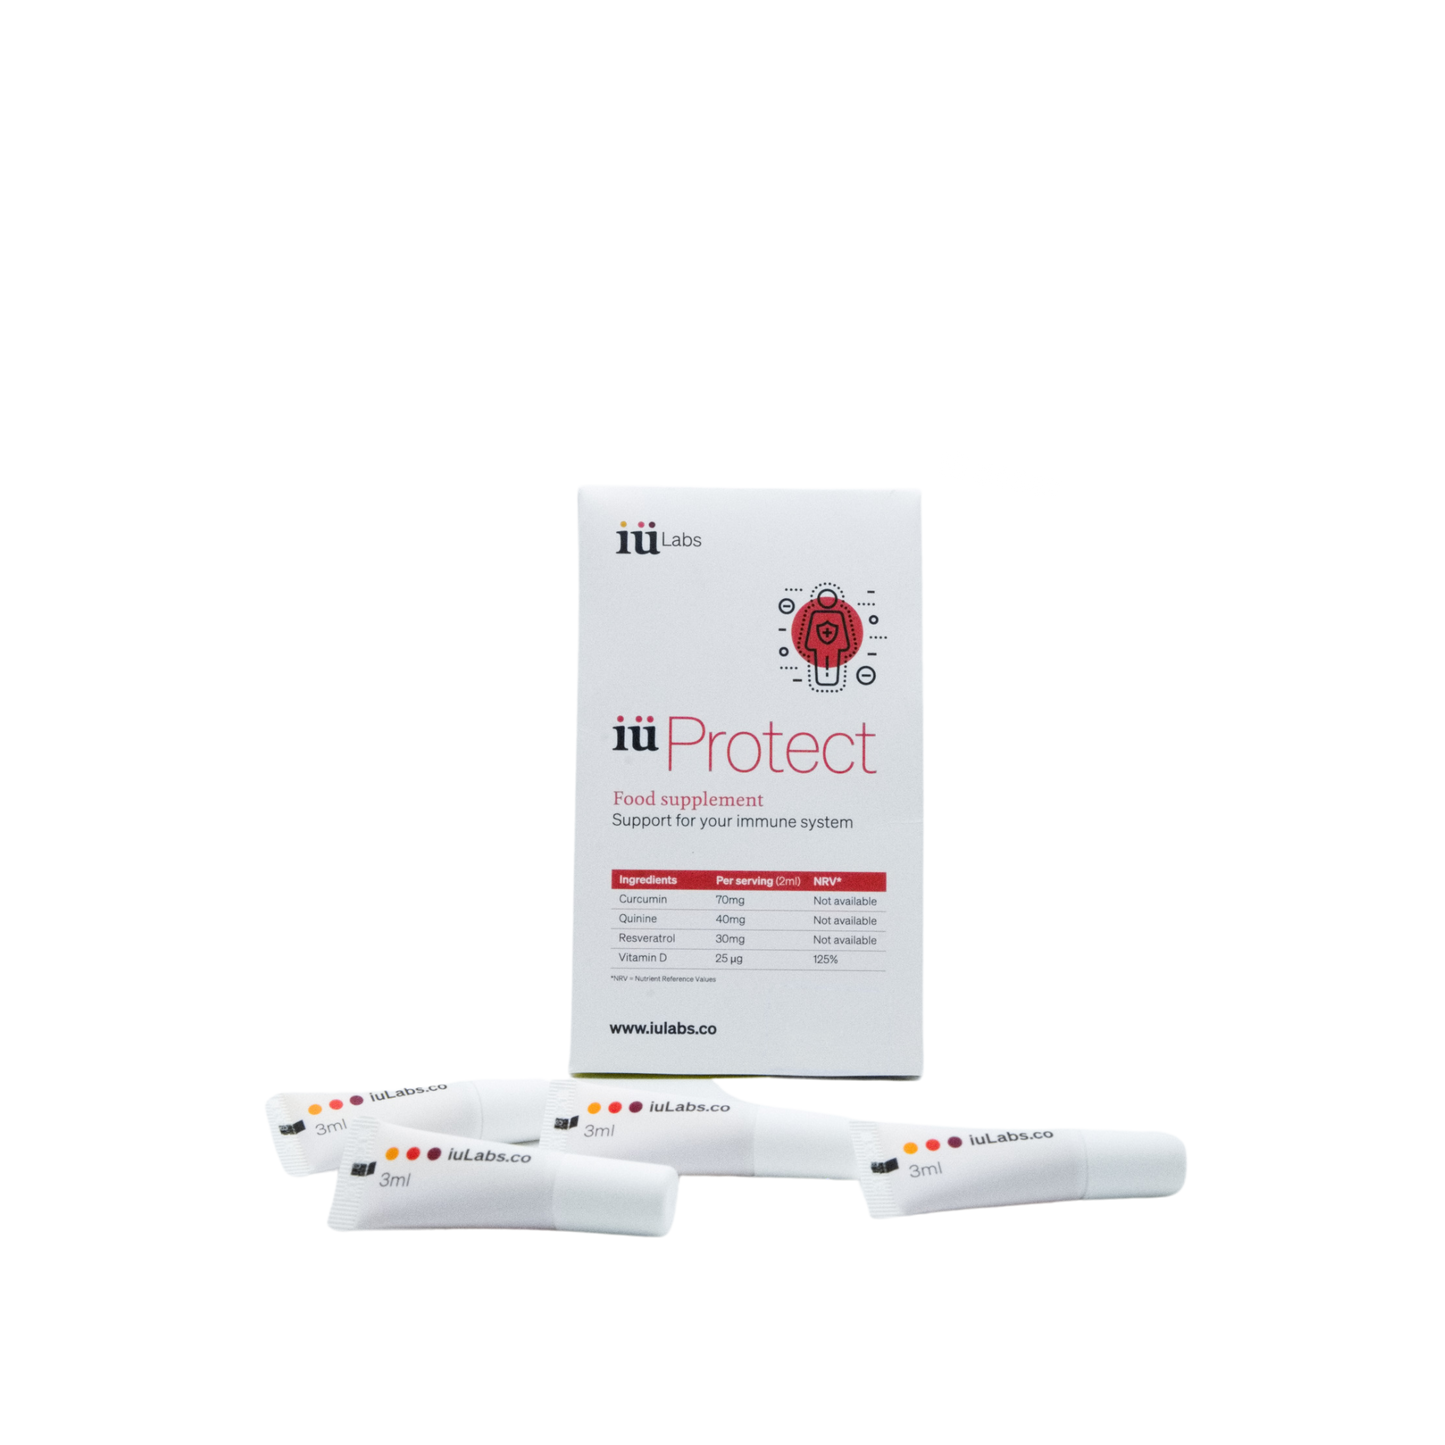 15-day trial pack of iüProtect from iüLabs, immune health support supplement, tubes and package